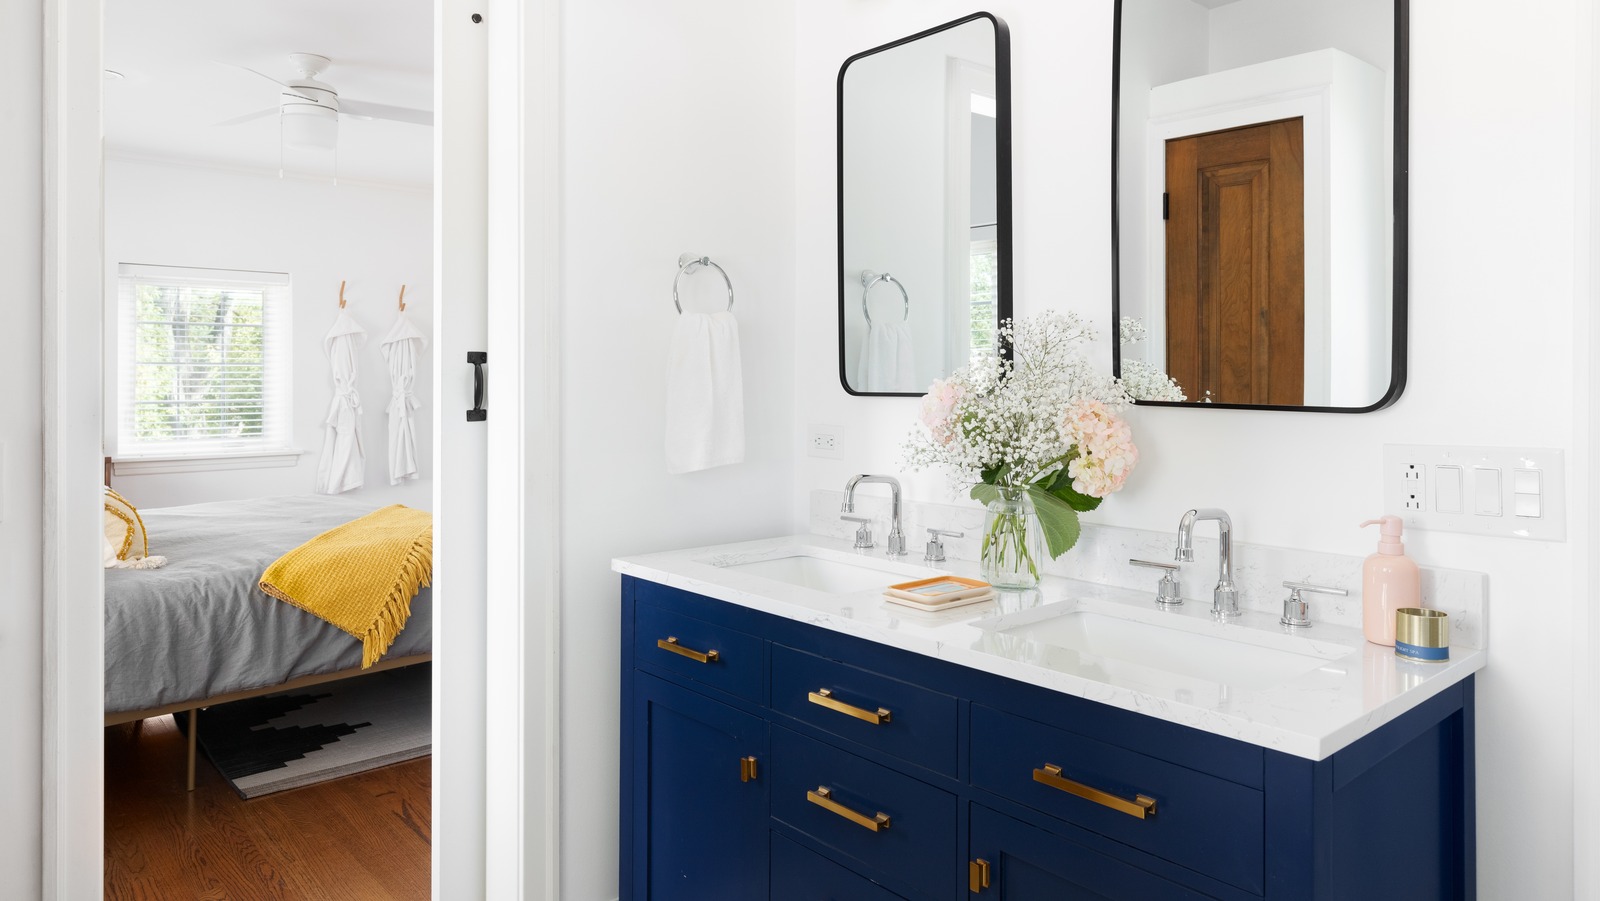 https://www.housedigest.com/img/gallery/blue-vanities-are-the-latest-bathroom-trend-but-experts-warn-against-buying-into-the-hype/l-intro-1678088375.jpg